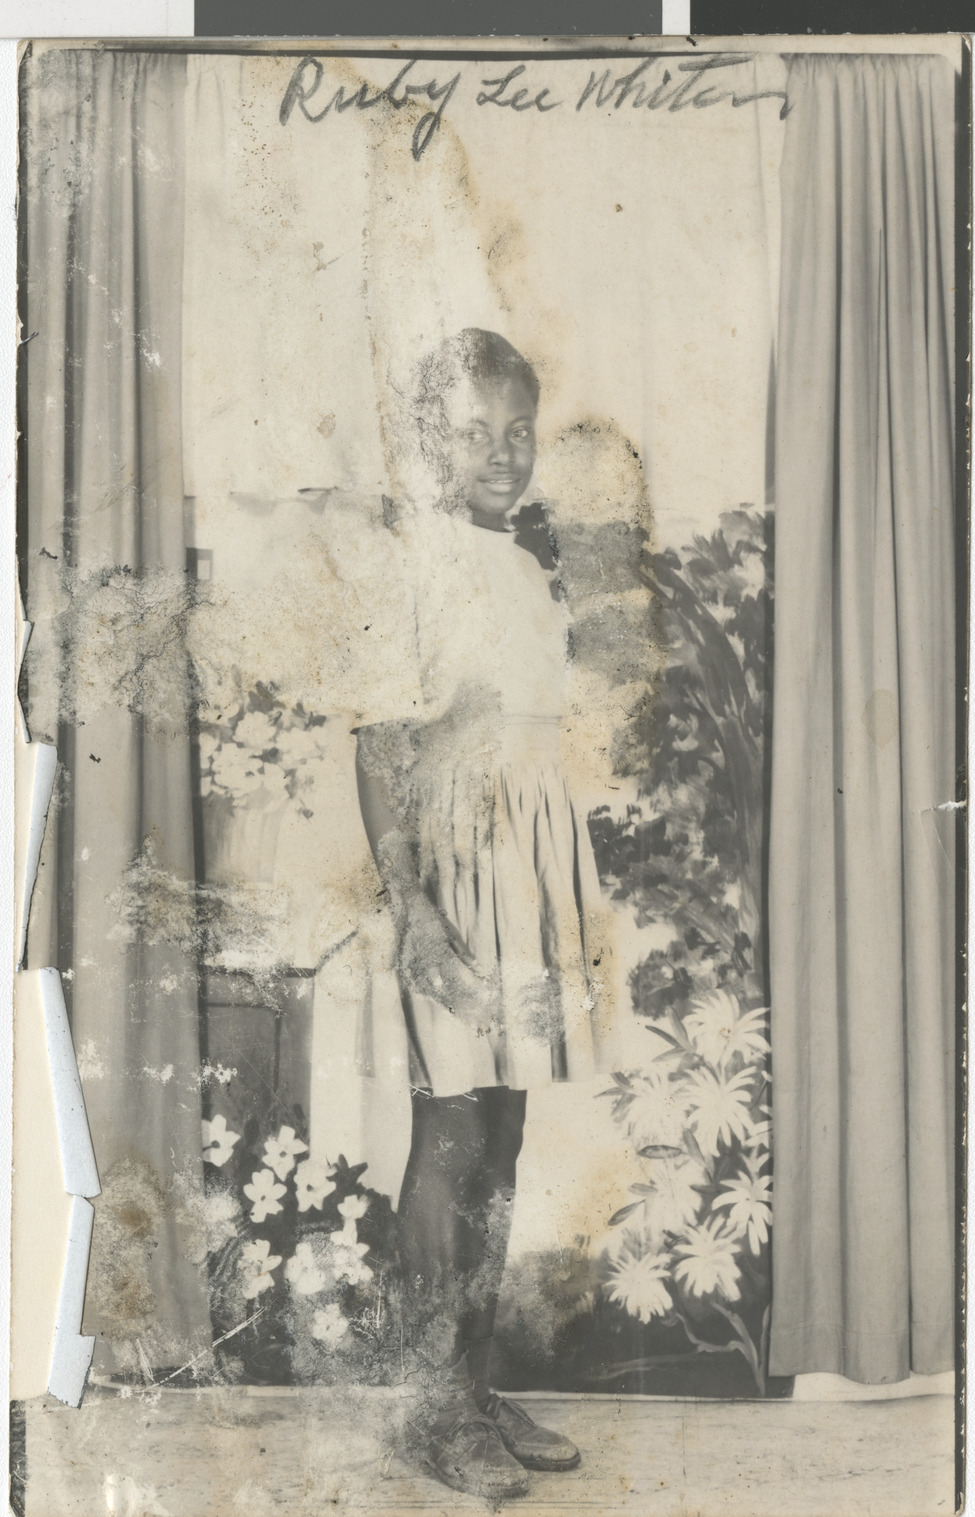 Black and white (sepia) photograph of Ruby at age 12